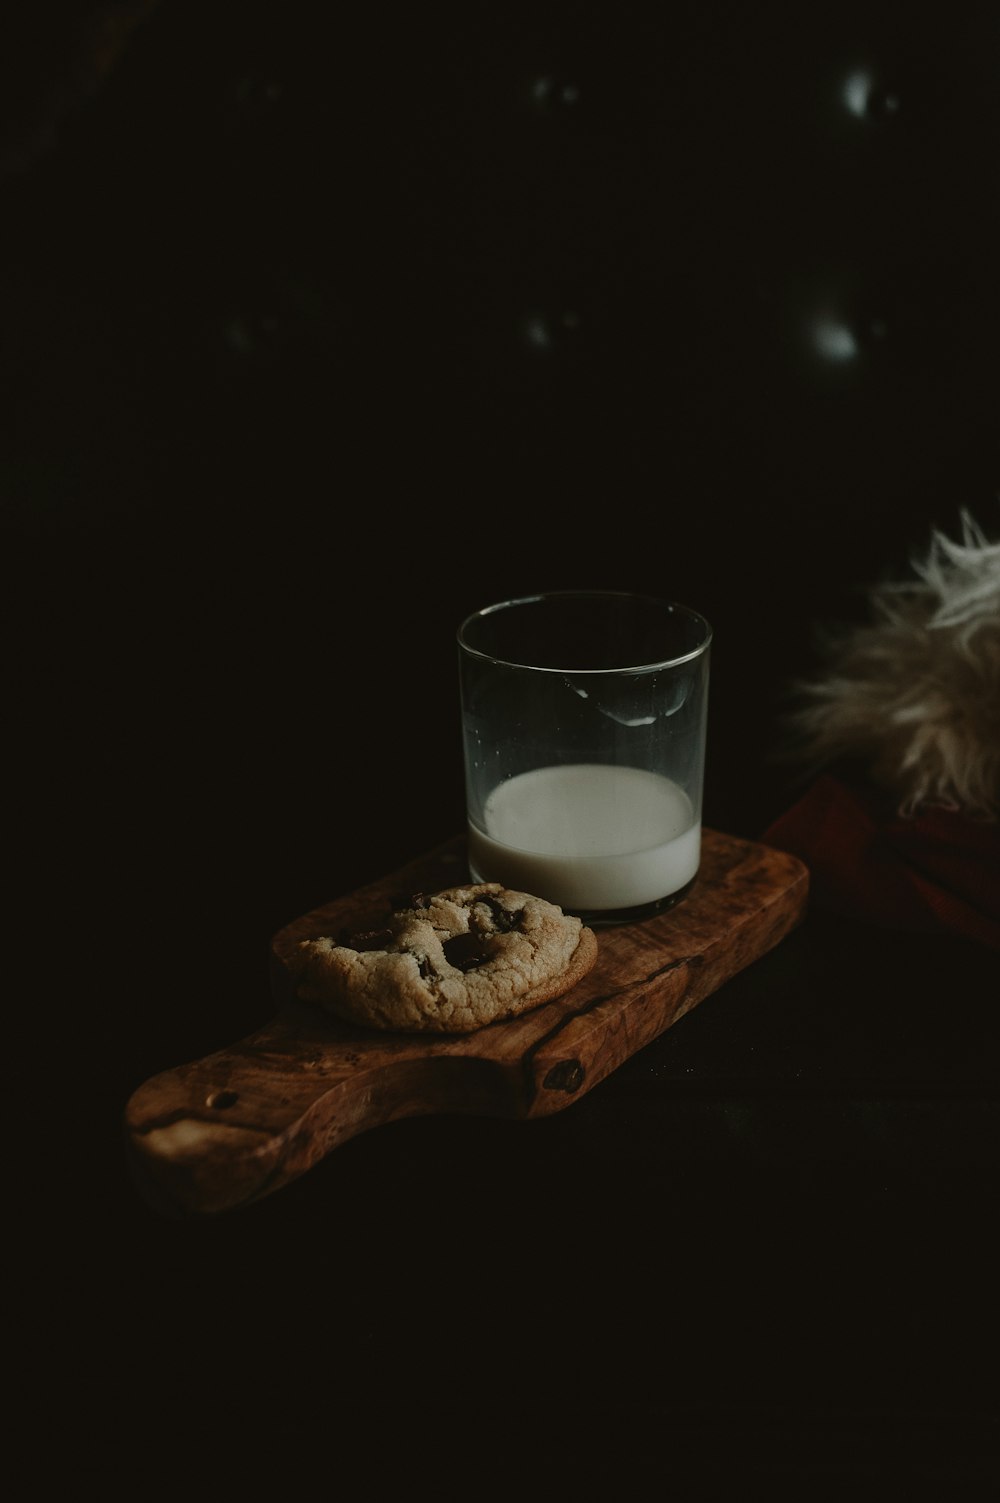 a glass of milk and a cookie on a wooden board